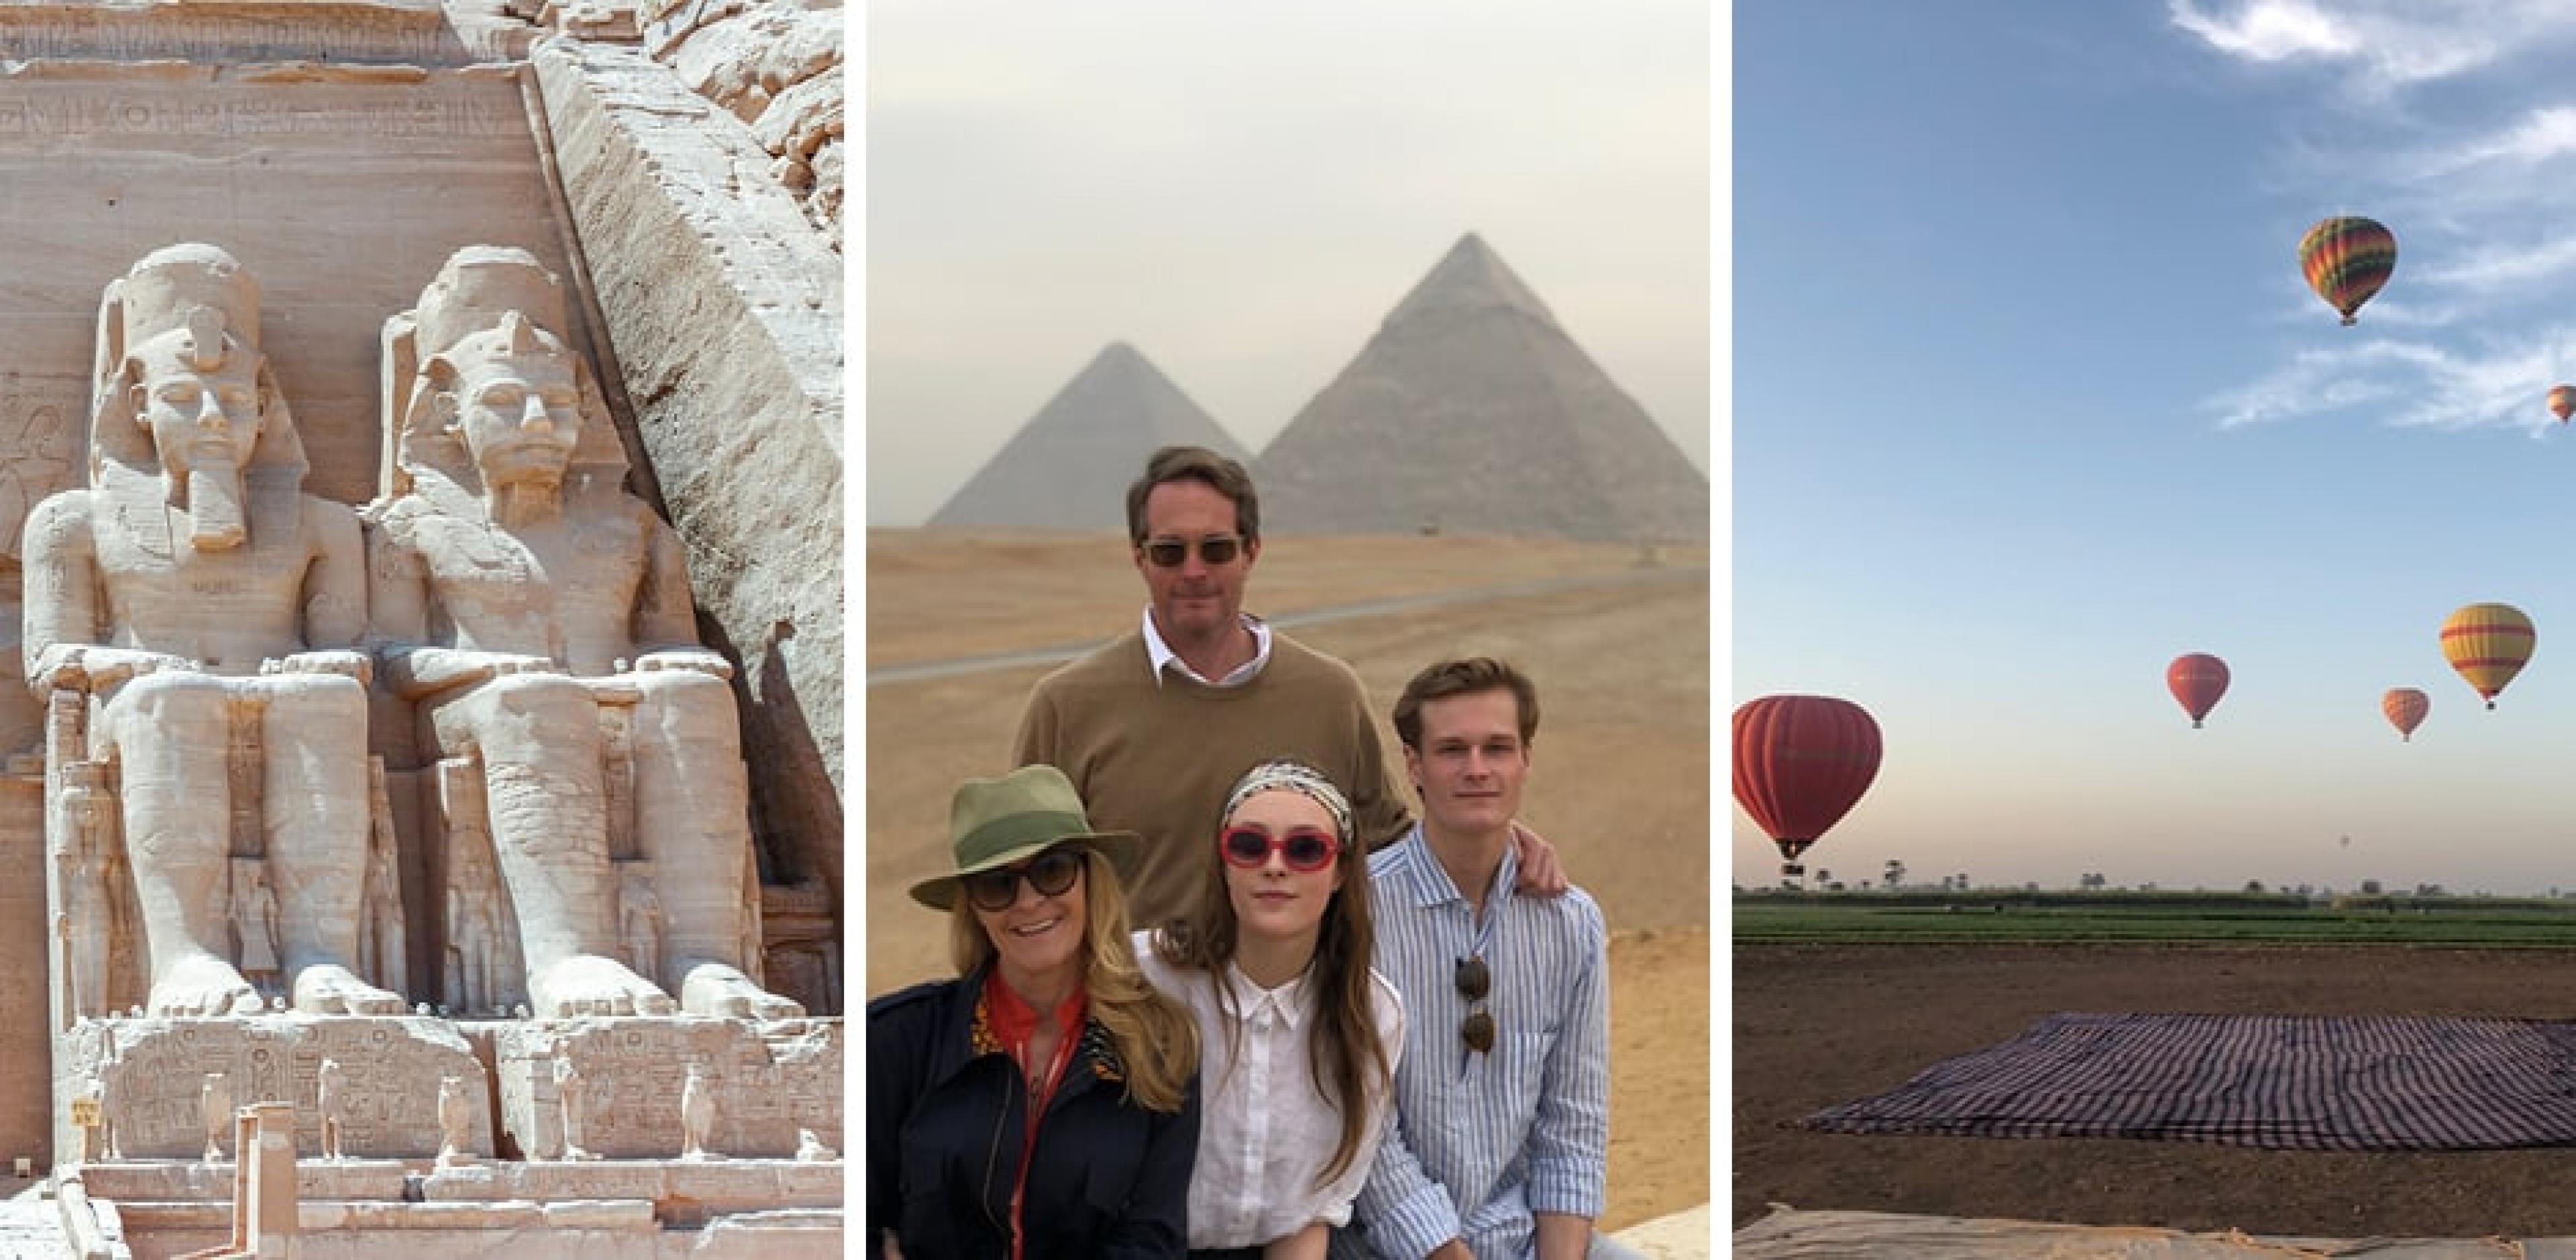 Abu Simbel; Melissa Biggs Bradley and her family in front of the Egyptian pyramids; hot air balloons in Luxor